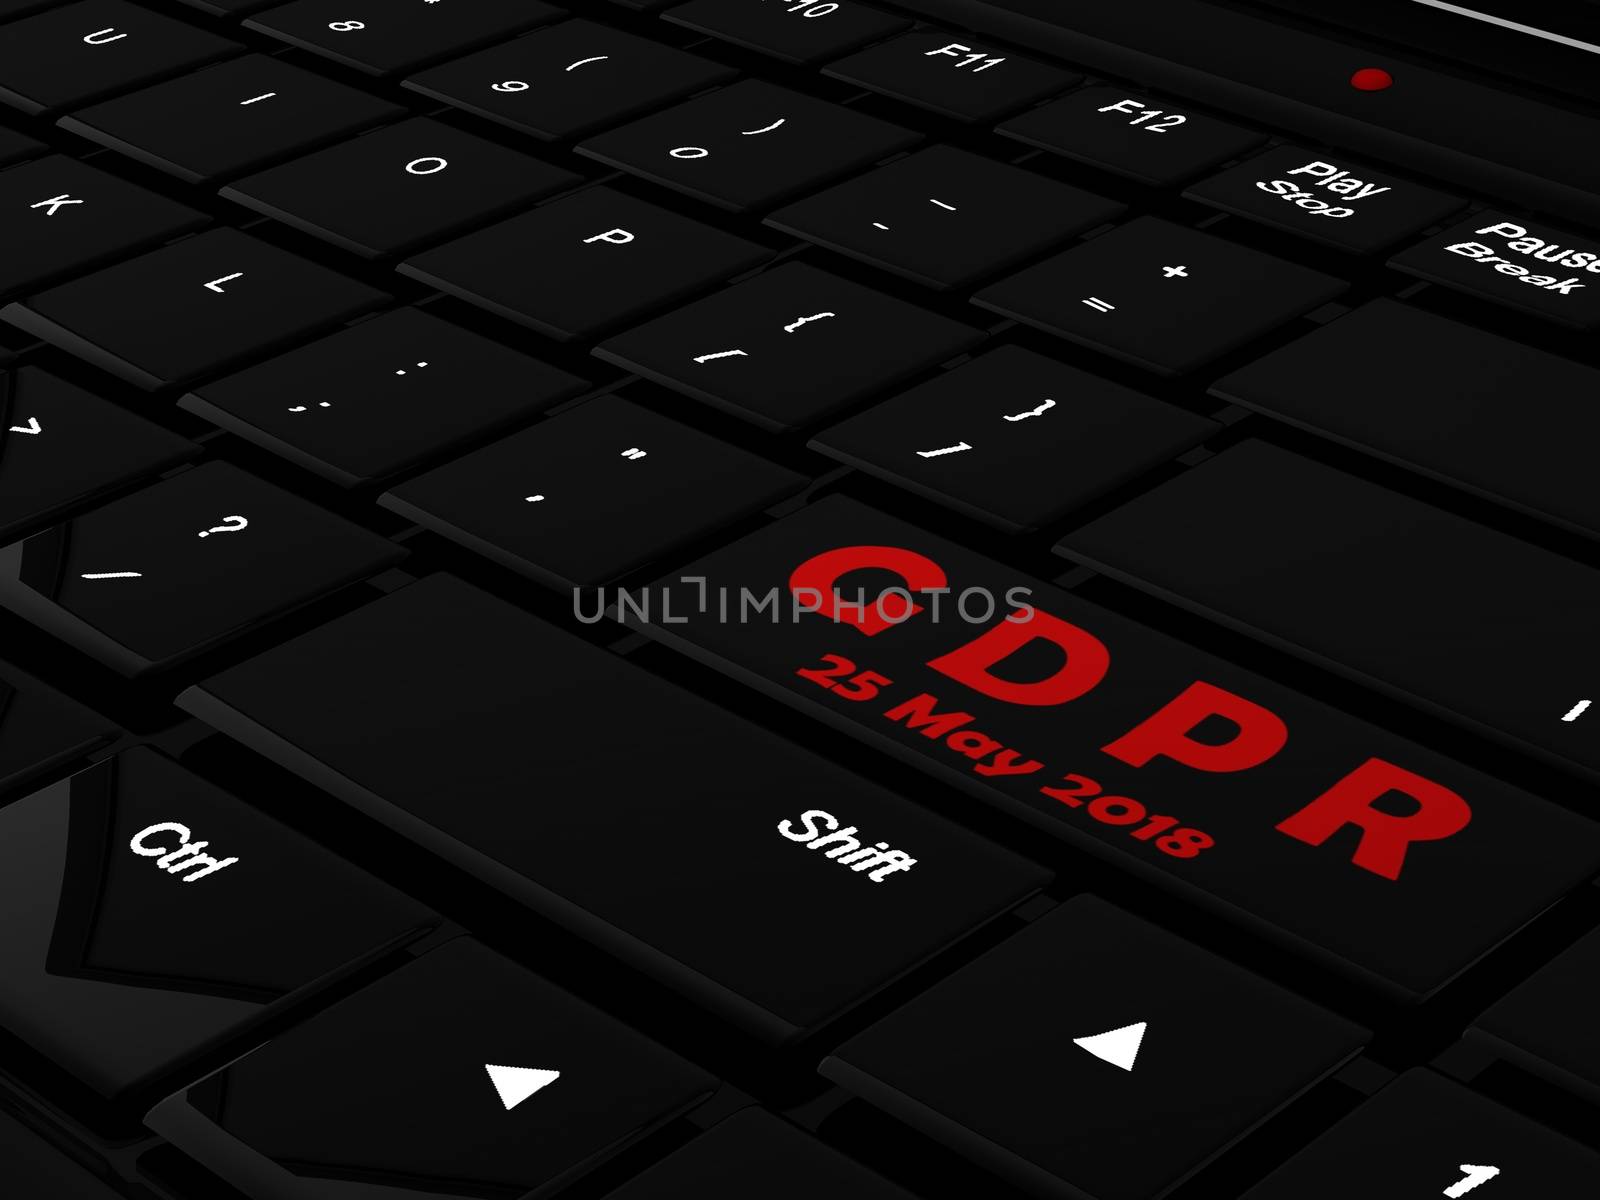 GDPR 3D concept on a laptop keyboard black buttons with white and red signs